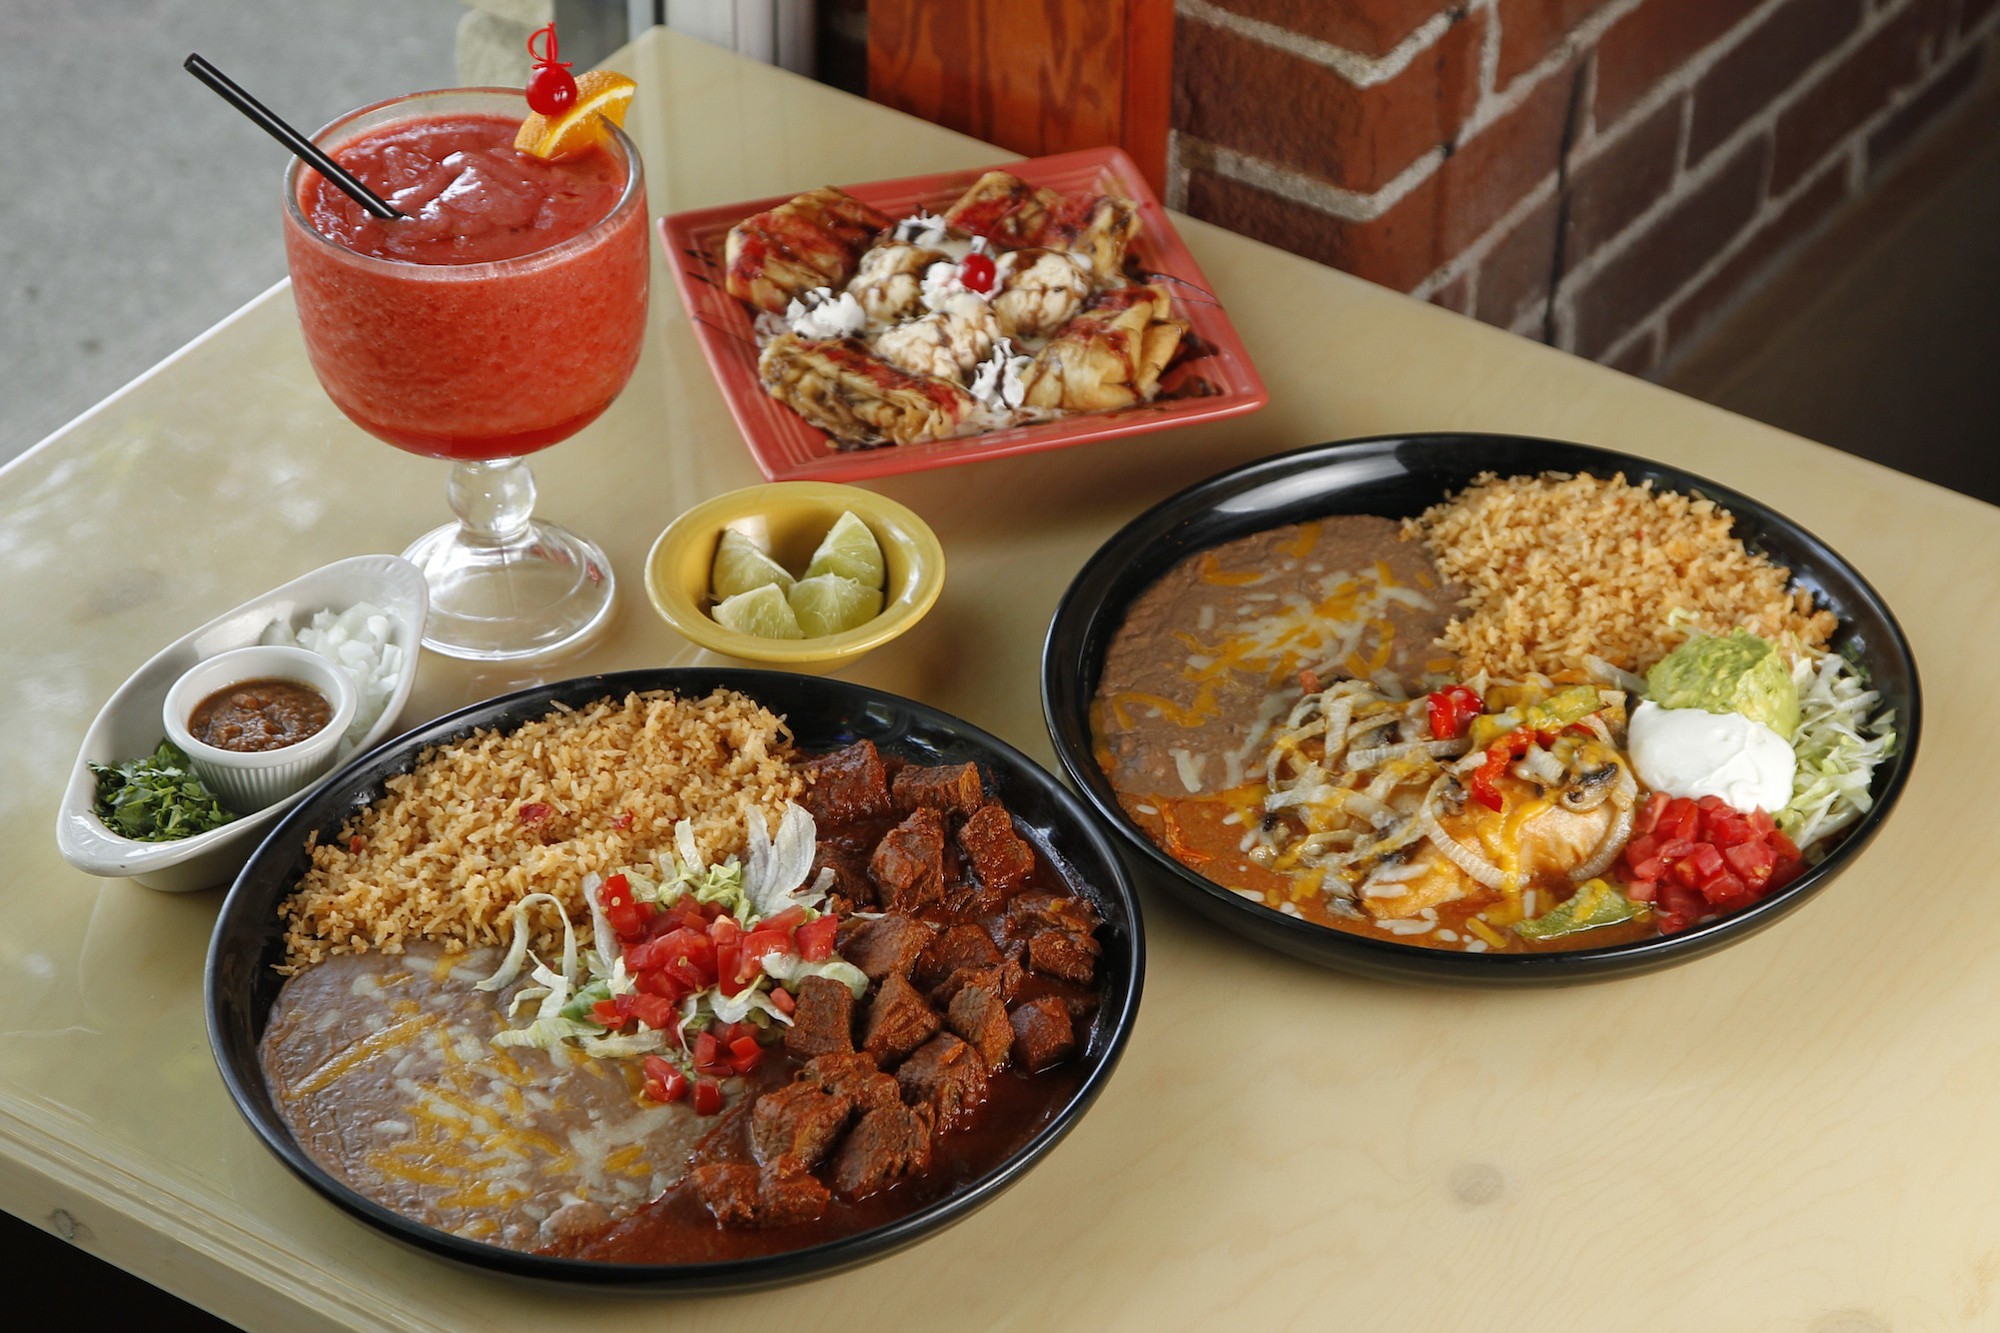 Chile colorado, left, enchiladas rancheras and banana chimi for dessert at Jorge's Tequila Factory.